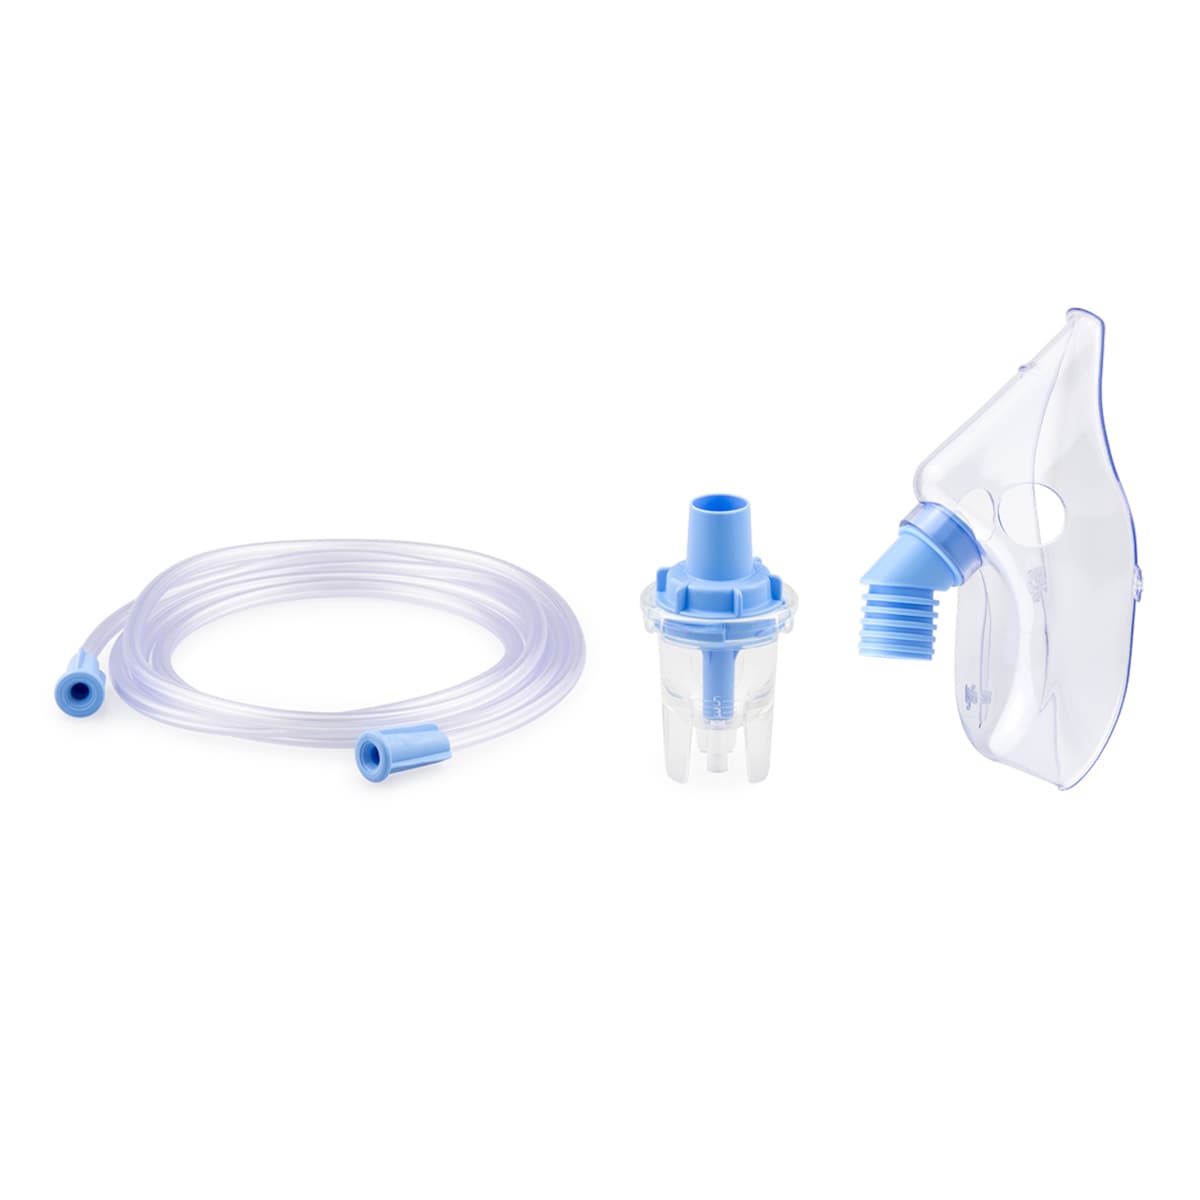 ABLE Nebuliser Kit for Adults